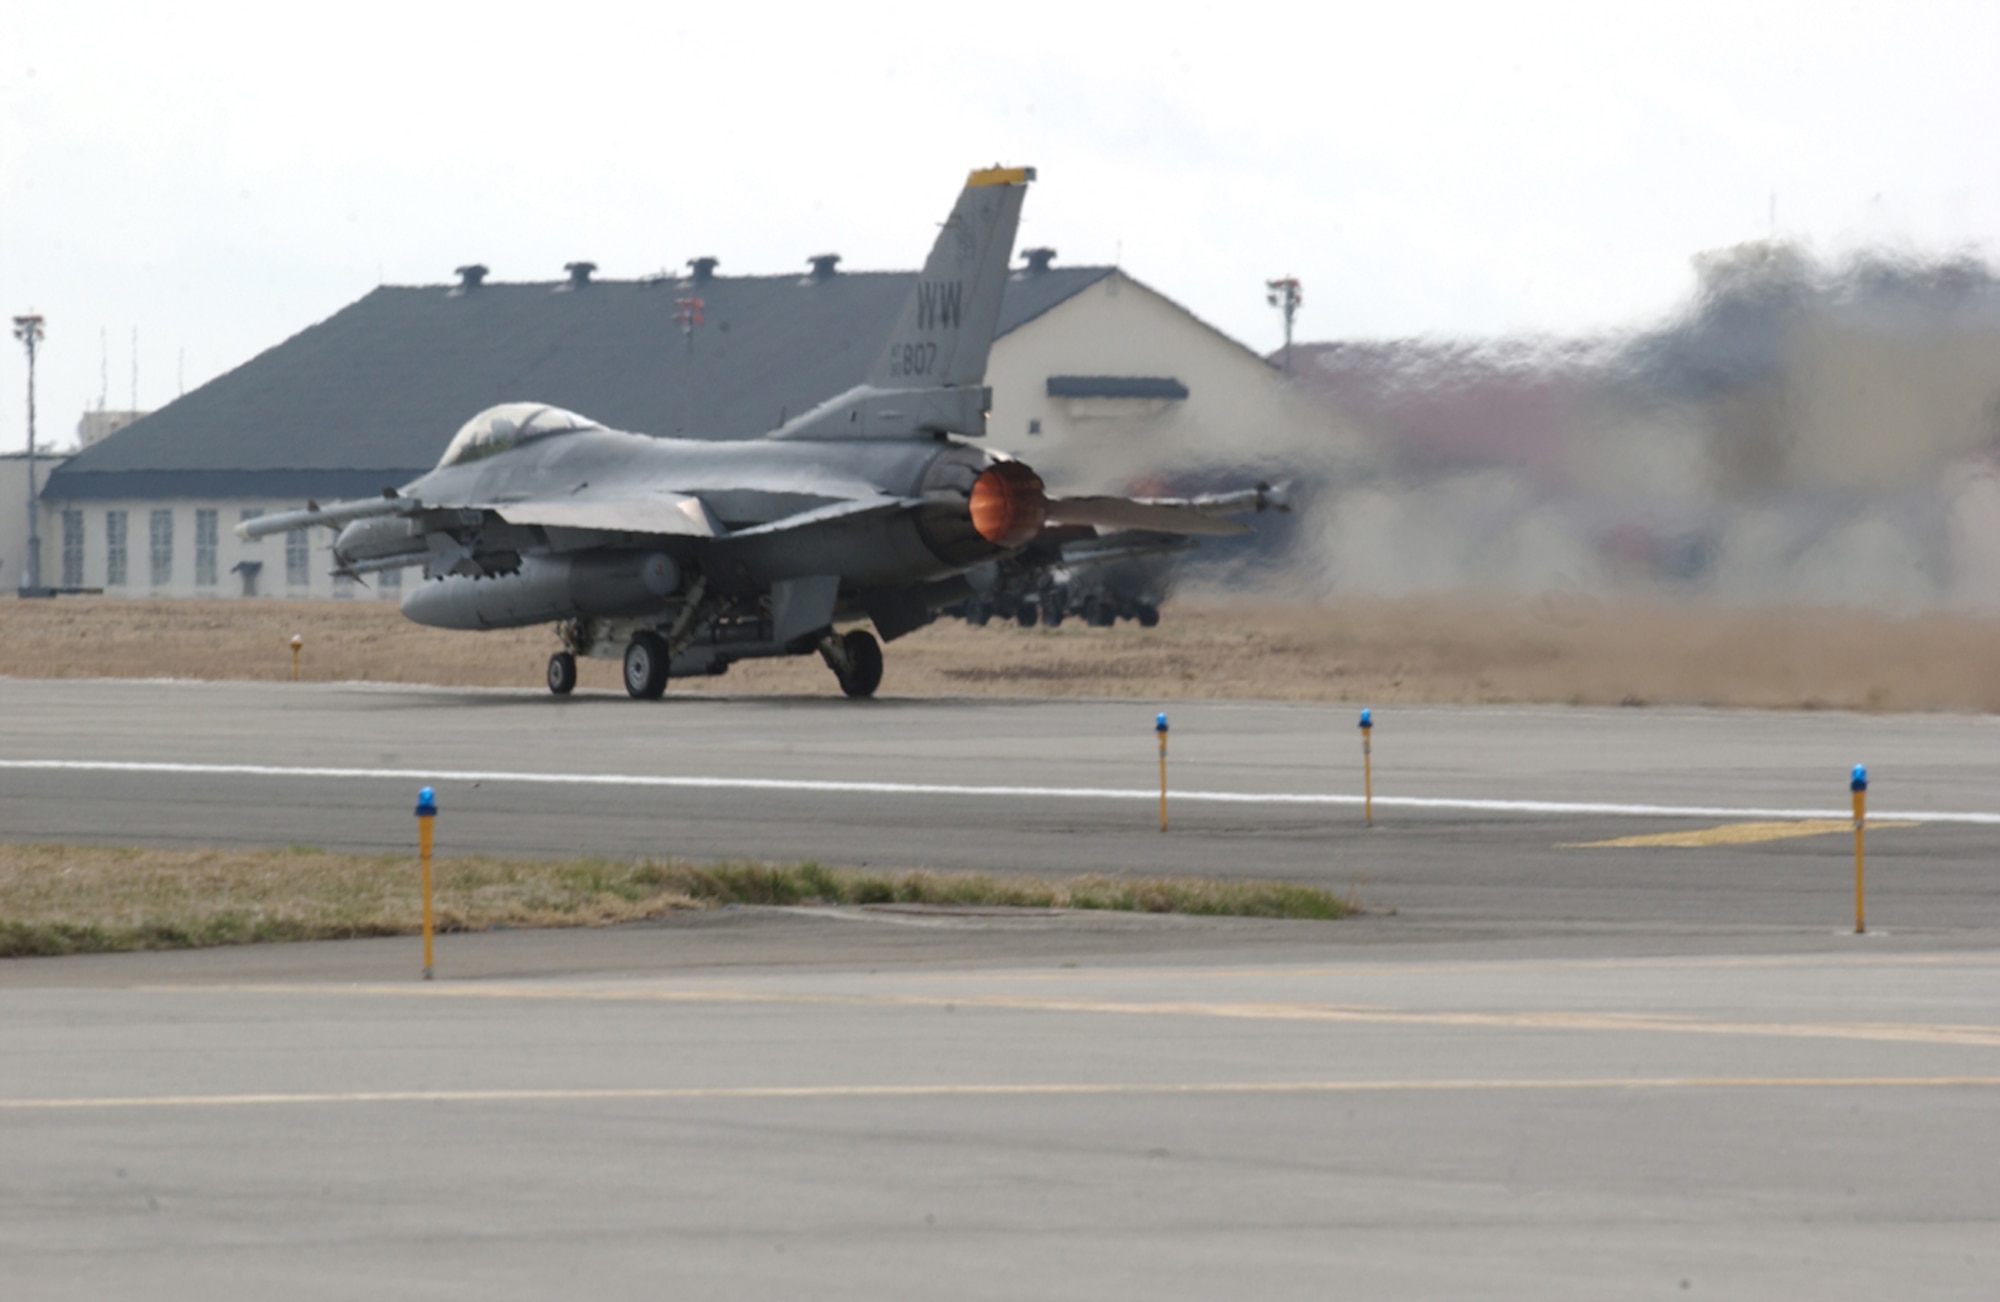 070413--MISAWA AIR BASE, Japan --A Misawa Wild Weasel F-16 pilot takes off here. The 13th Fighter Squadron is making final preparations for their Air Expeditionary Force deployment to Iraq this summer. The squadron will replace the 14th Fighter Squadron currently conducting combat operations in Iraq.  (U.S. Air Force photo by Senior Airman Robert Barnett)